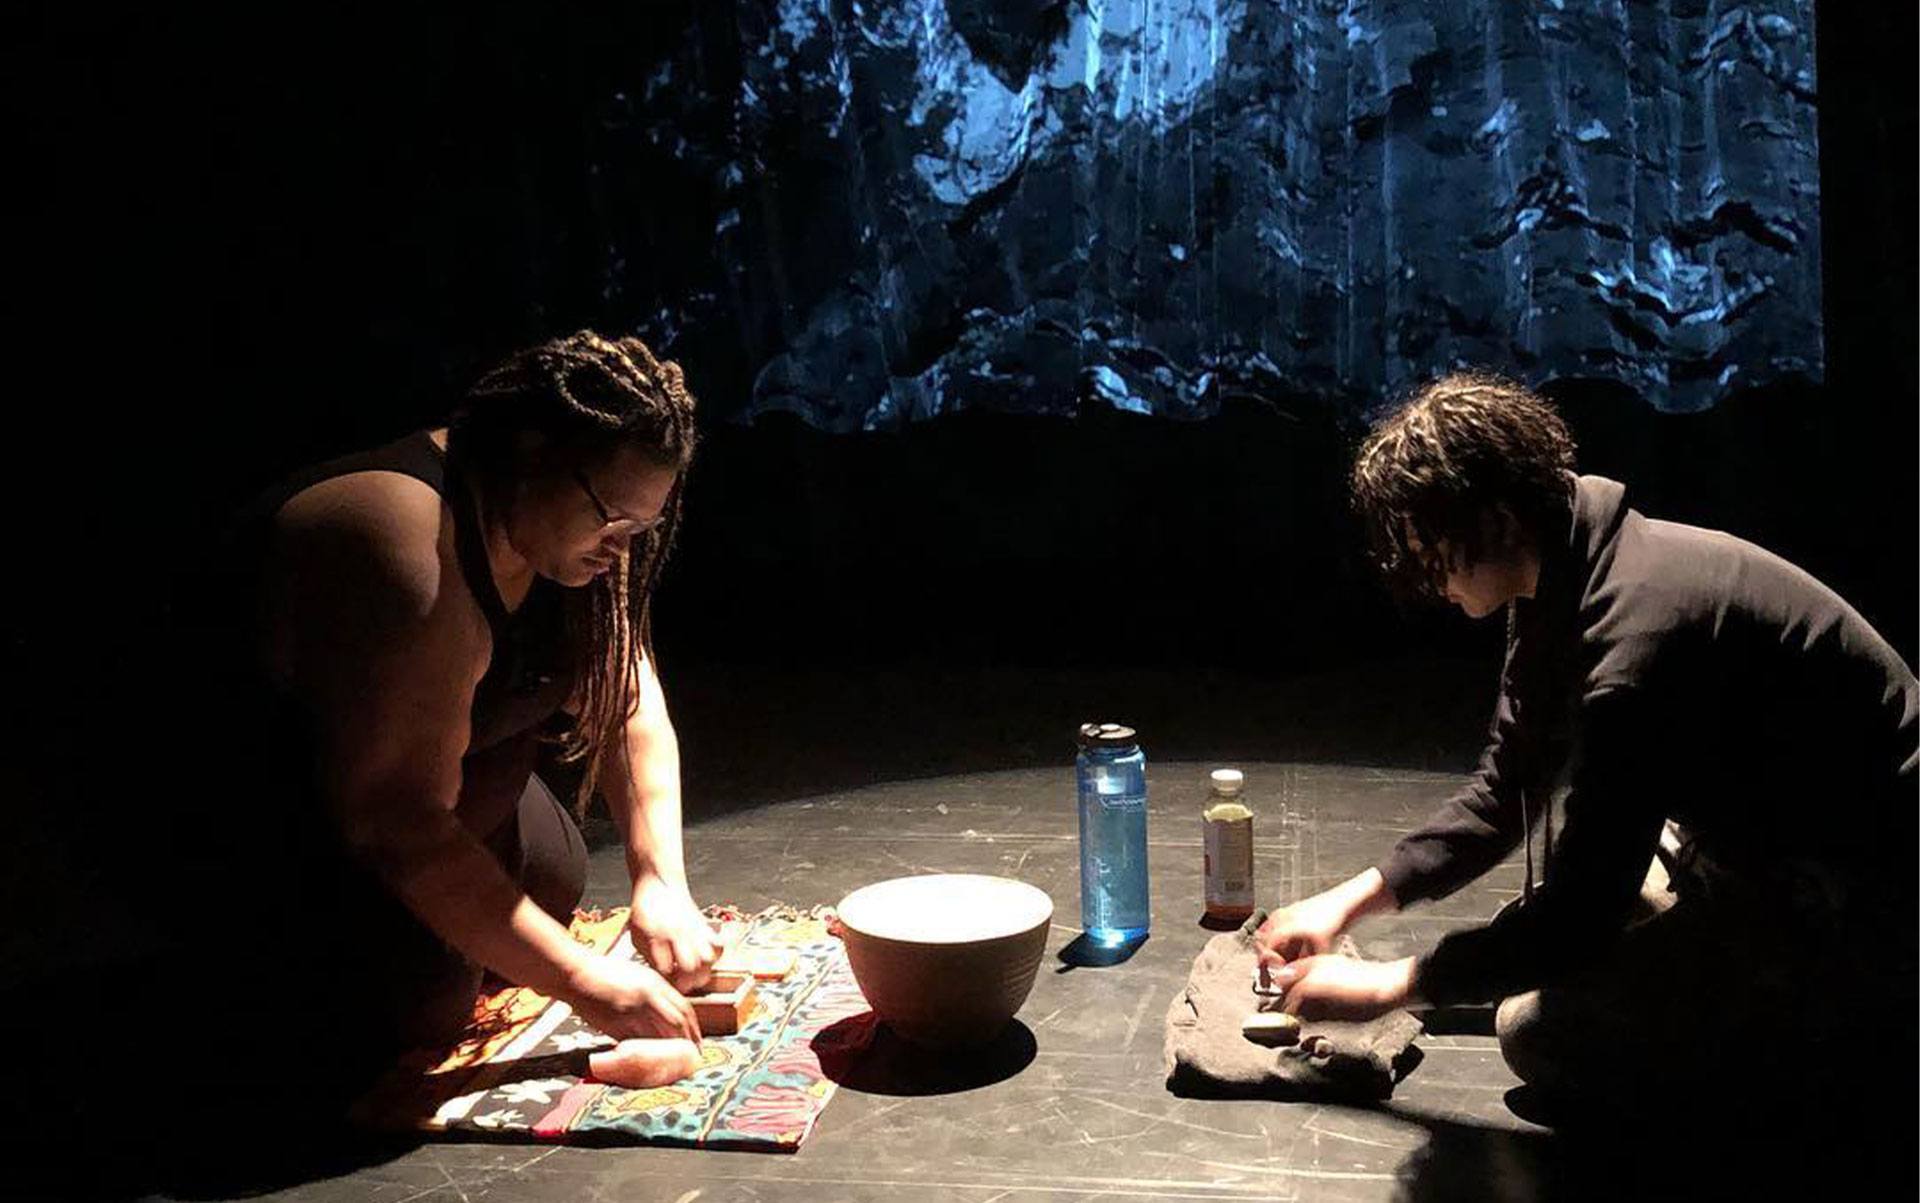 2 people sit working on different objects with their hands in a performance on a stage